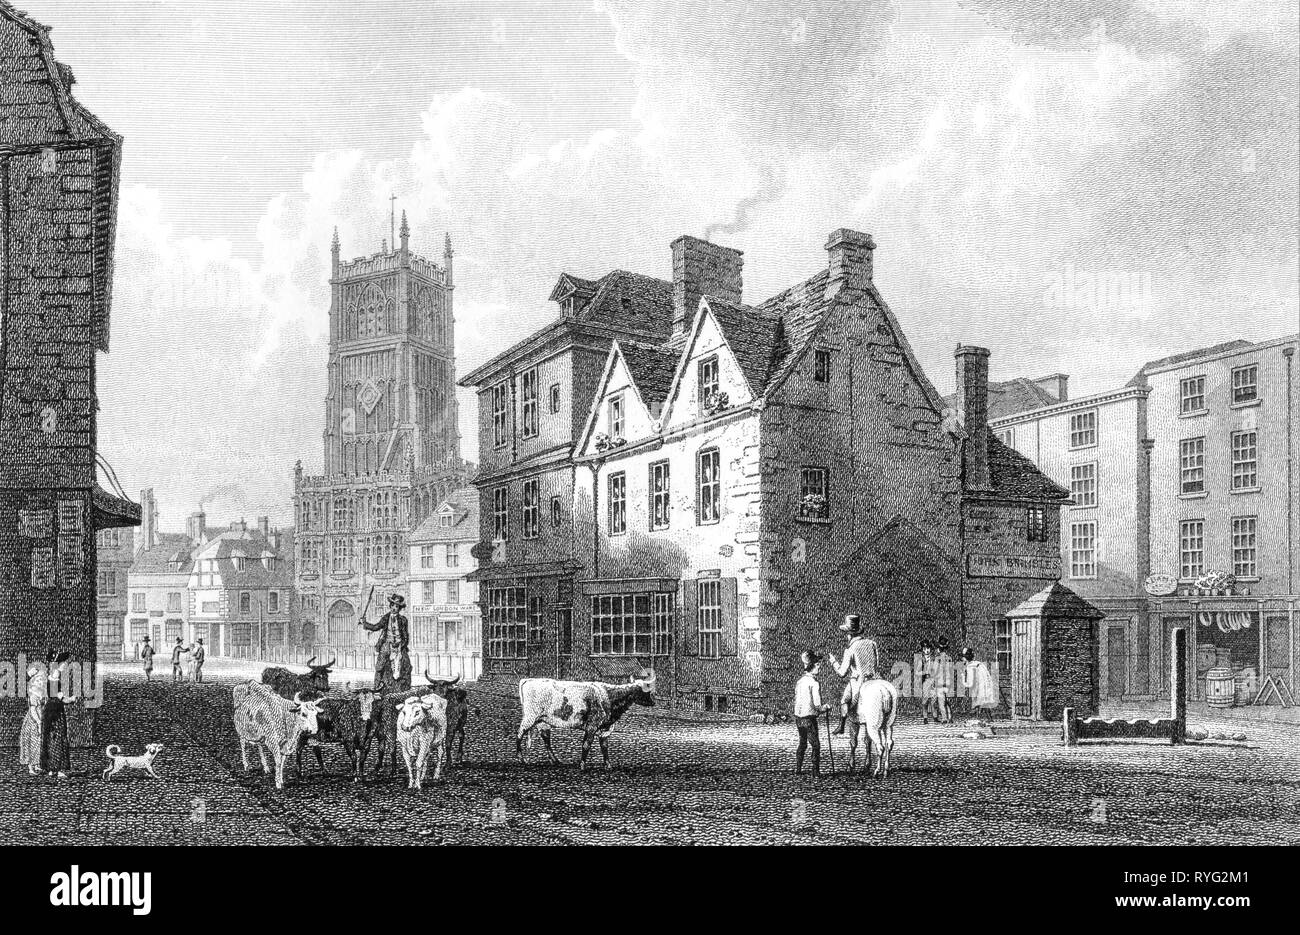 An engraving of Cirencester, Gloucestershire UK scanned at high resolution from a book published in 1825.  Believed copyright free. Stock Photo